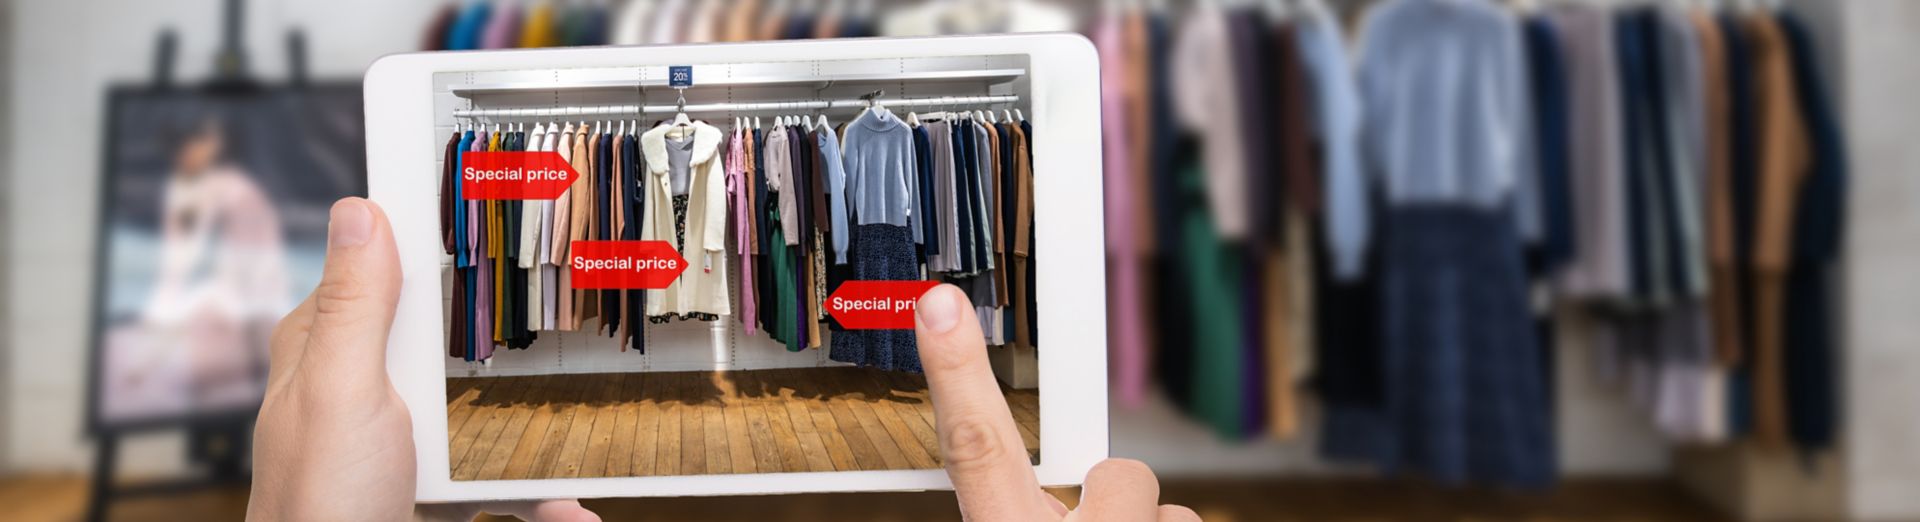 electronic tablet using smart technology to scan and analyse a rail of clothes using SAP cloud software and AI